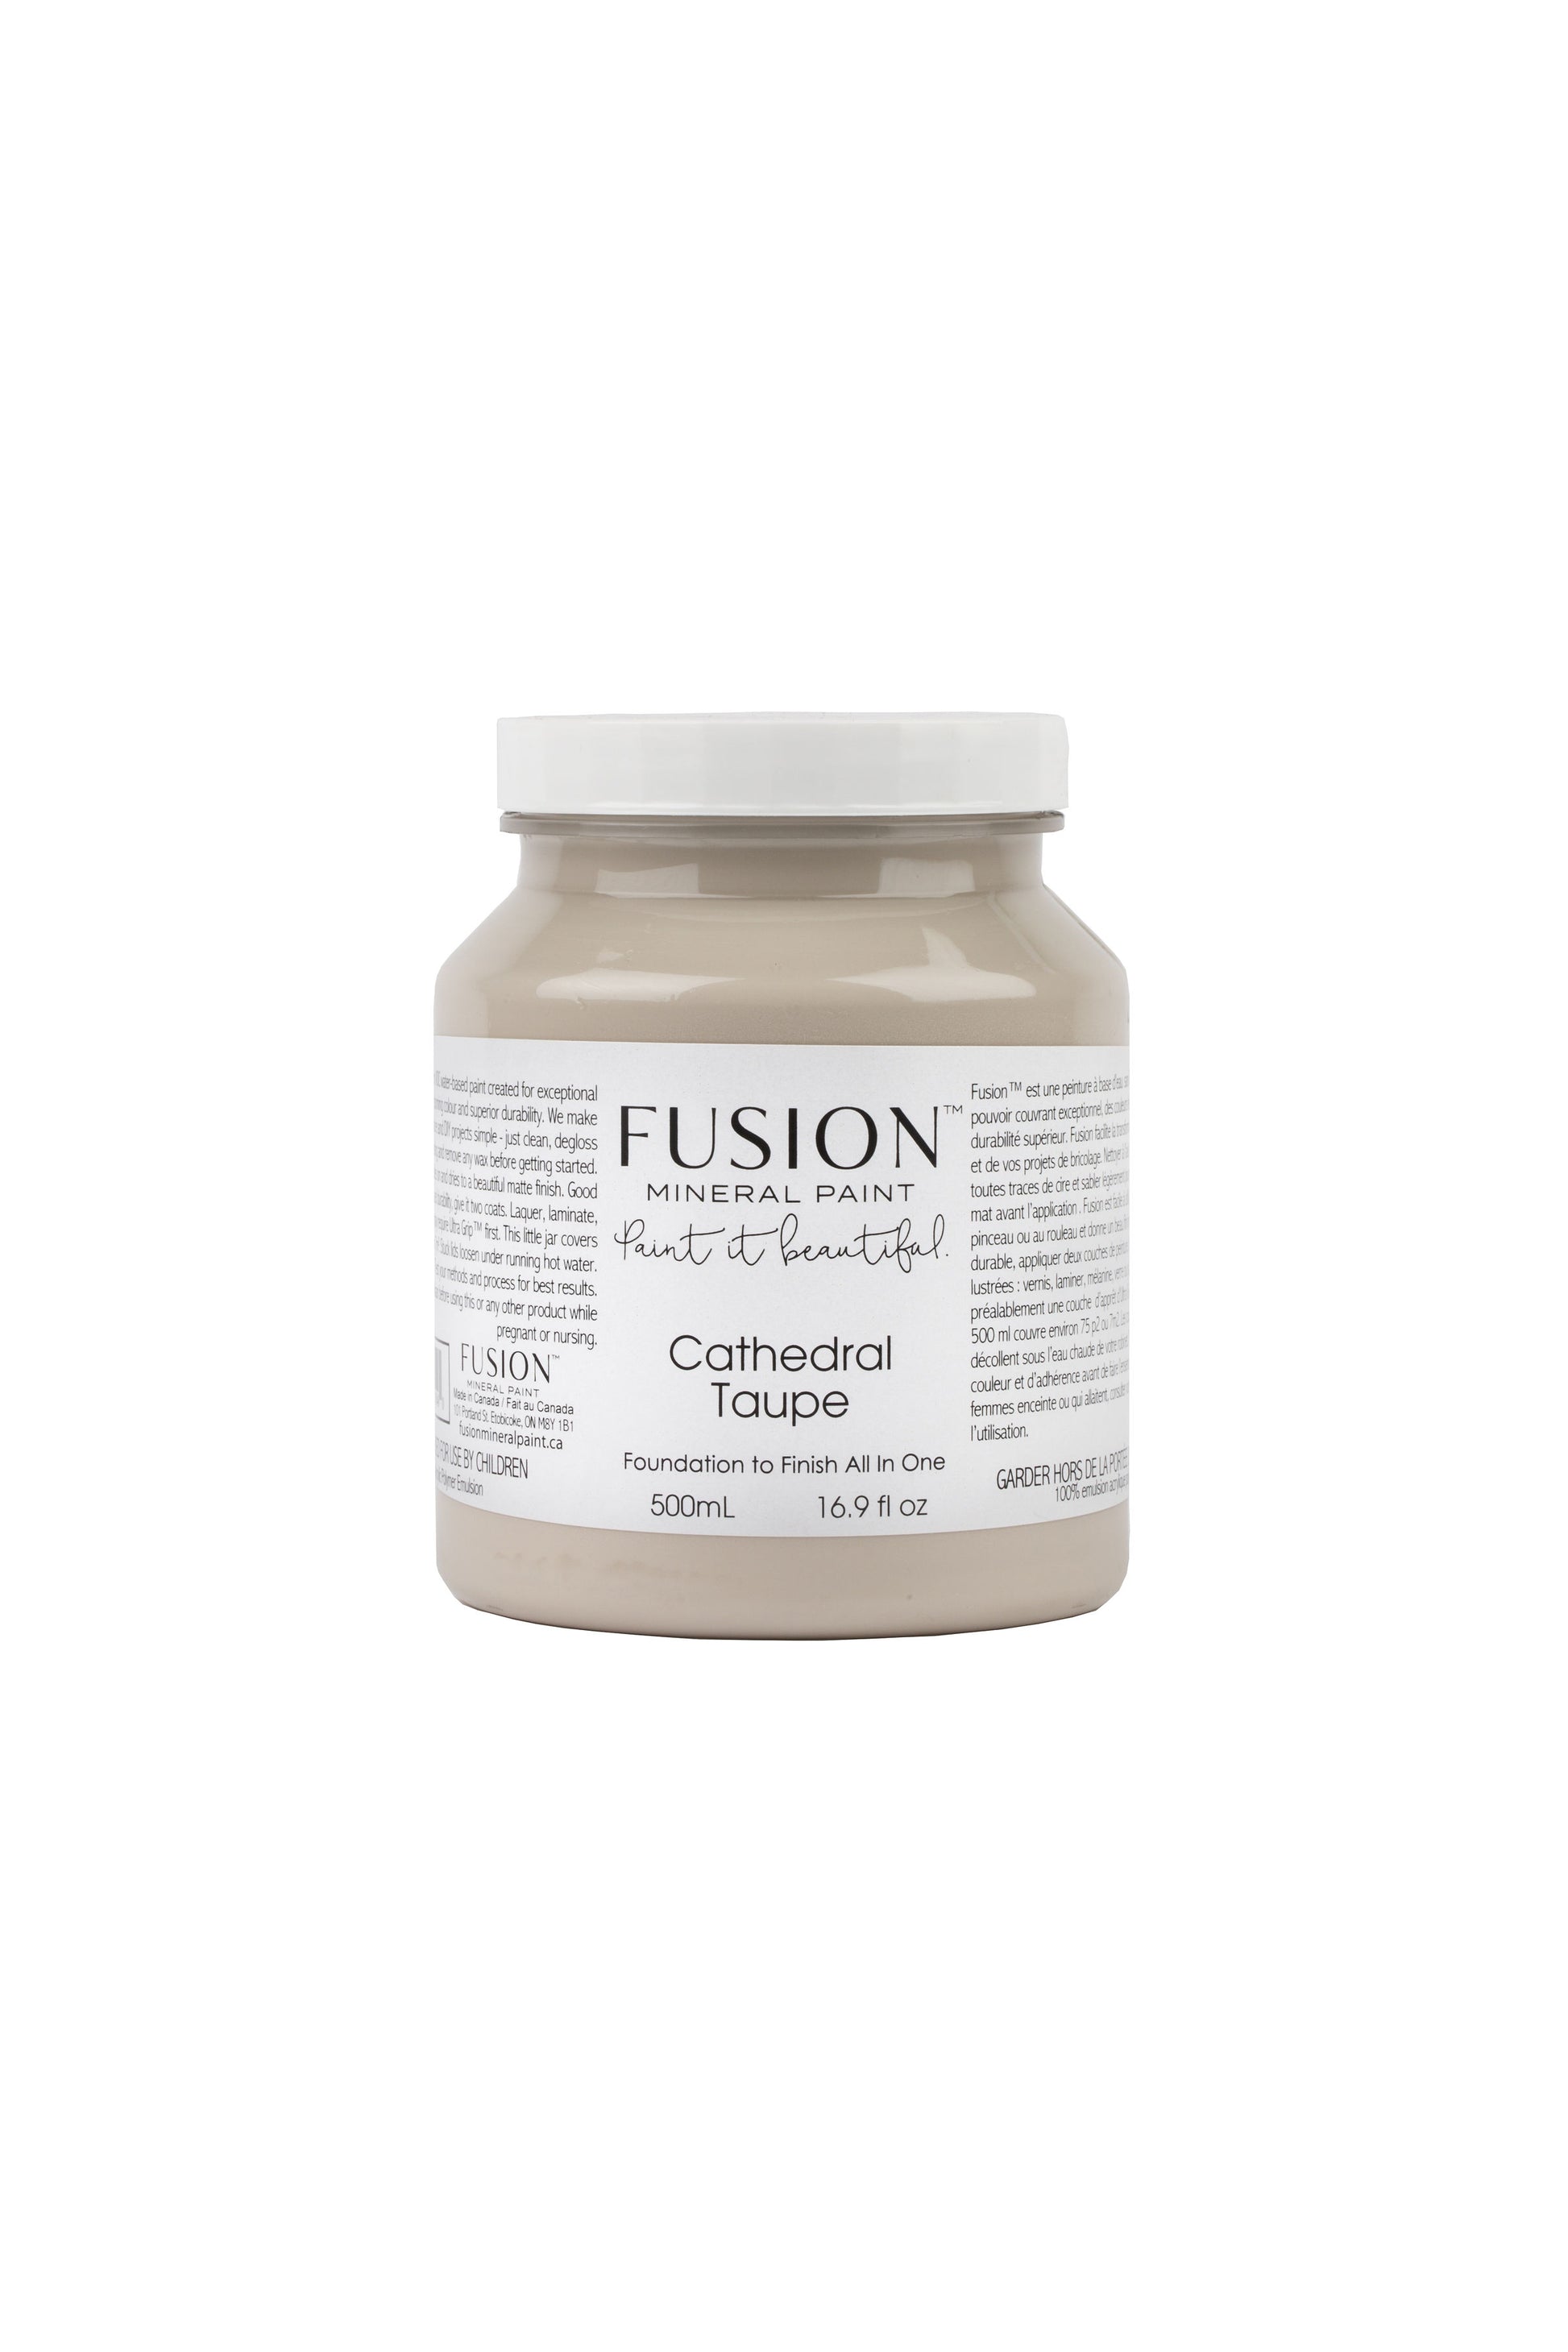 Cathedral Taupe Fusion Mineral Paint, Natural Beige Paint Color | 500ml Pint Size